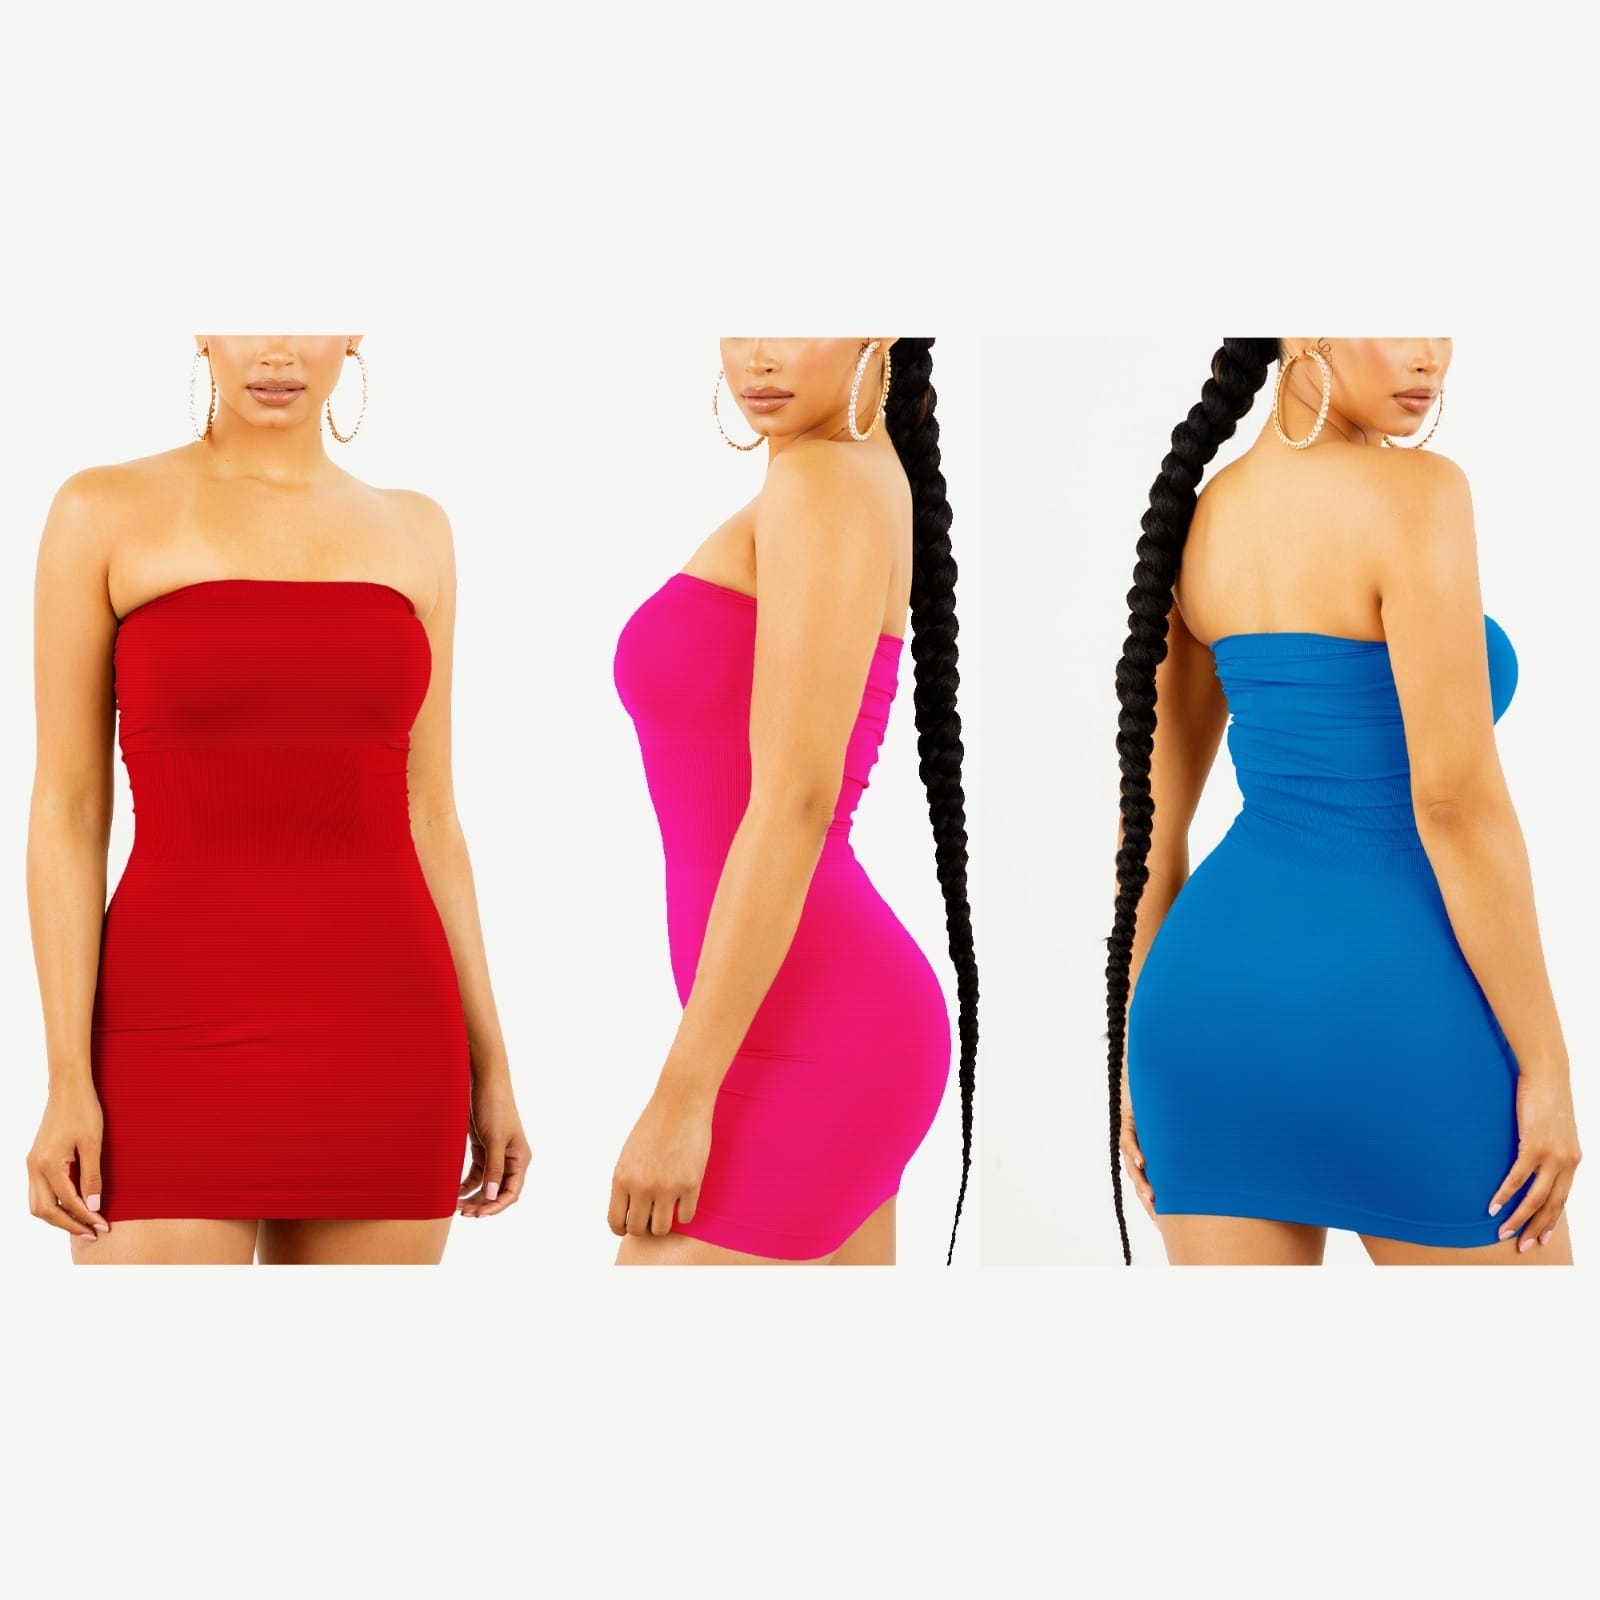 3-Pack Women's Strapless Stretchy Seamless Tight Fit Body Con Mini Tube Top Dress - PINK, 1XL